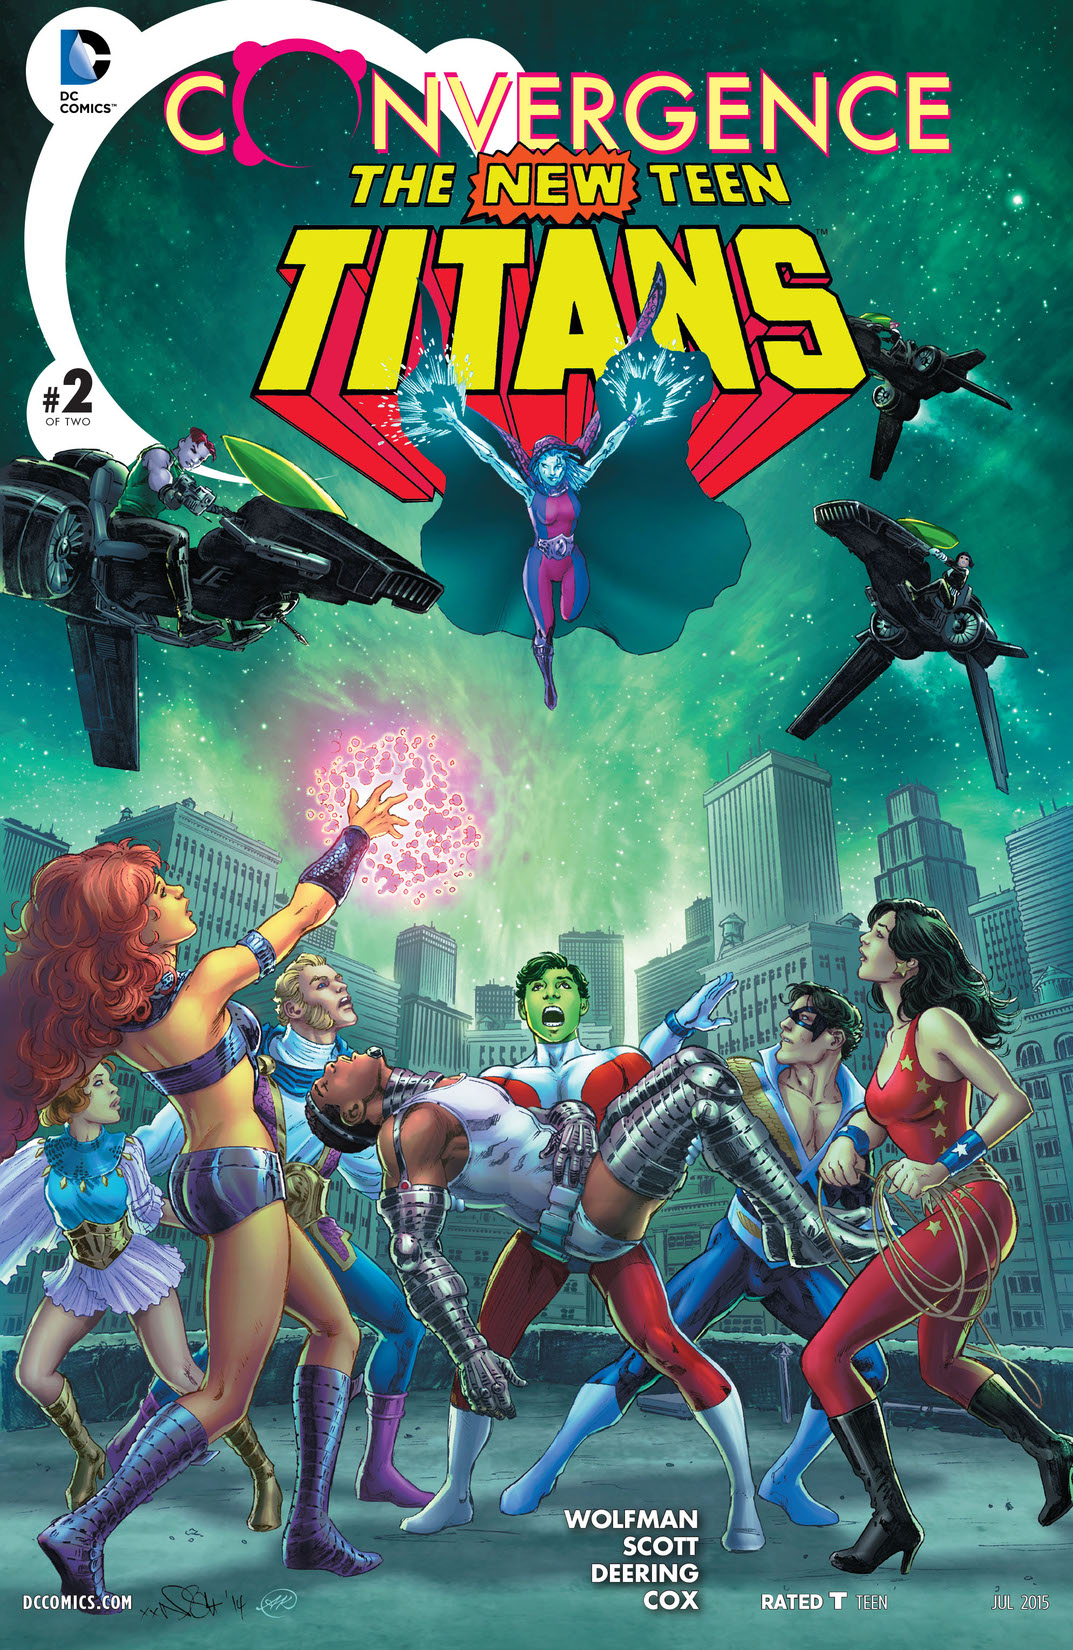 Convergence: New Teen Titans #2 preview images